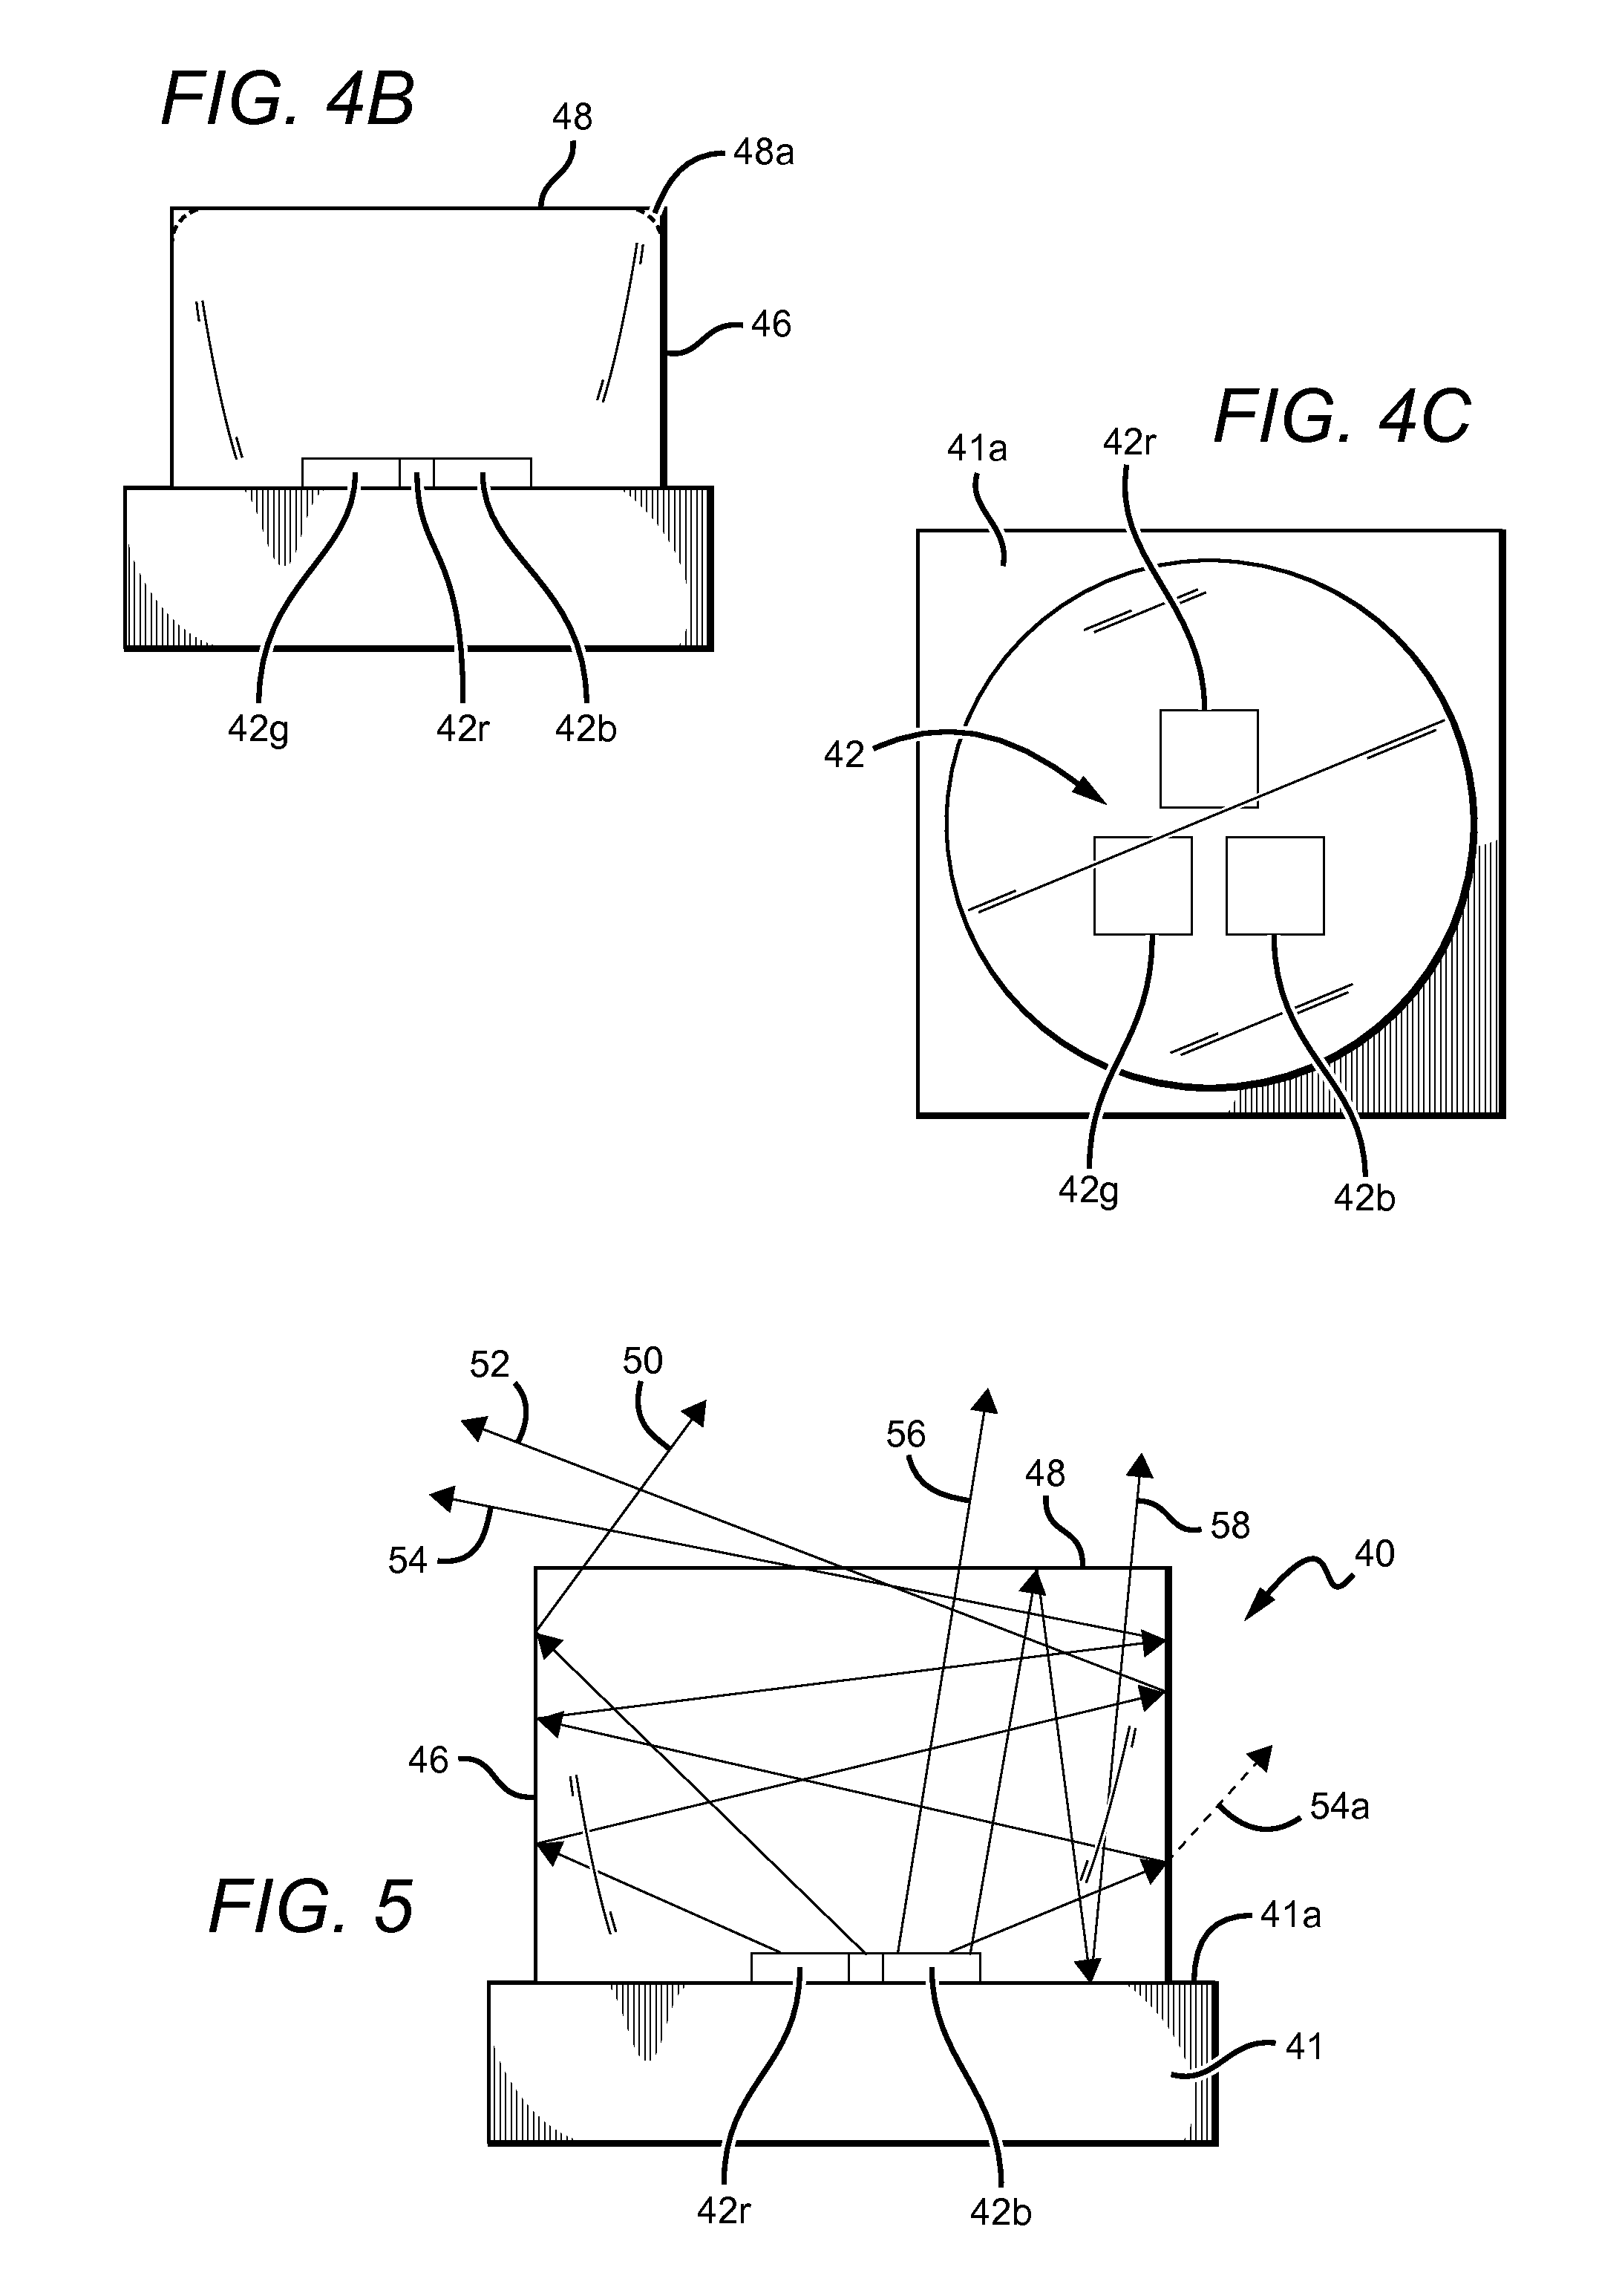 Emitter package with integrated mixing chamber